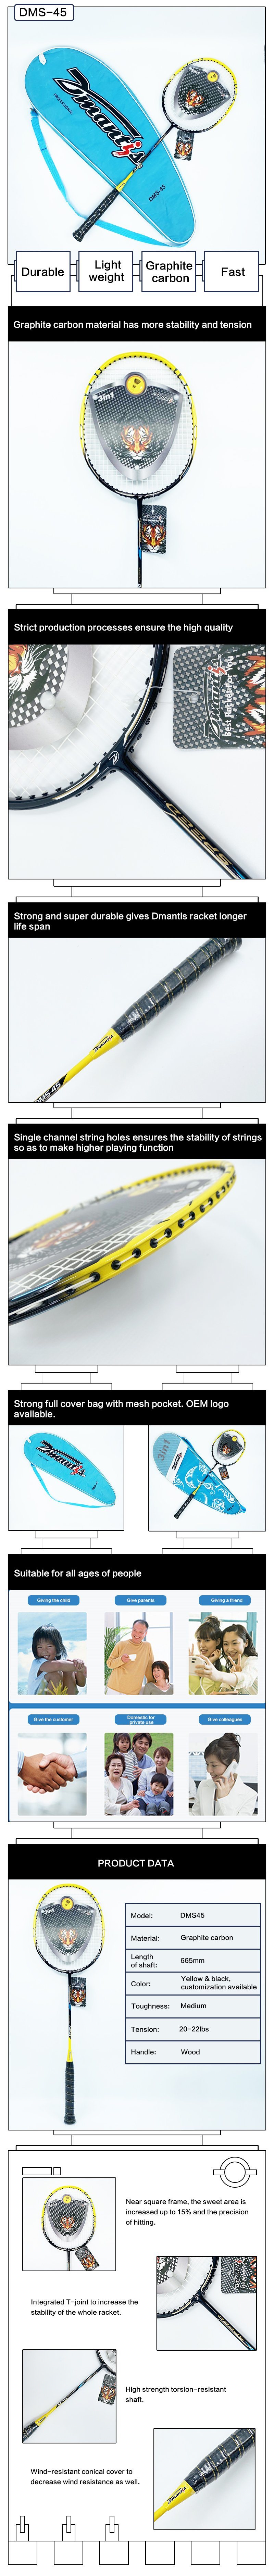 Indoor and Outdoor Activity Full Carbon Graphite Fiber Racket of High Quality Professional Training